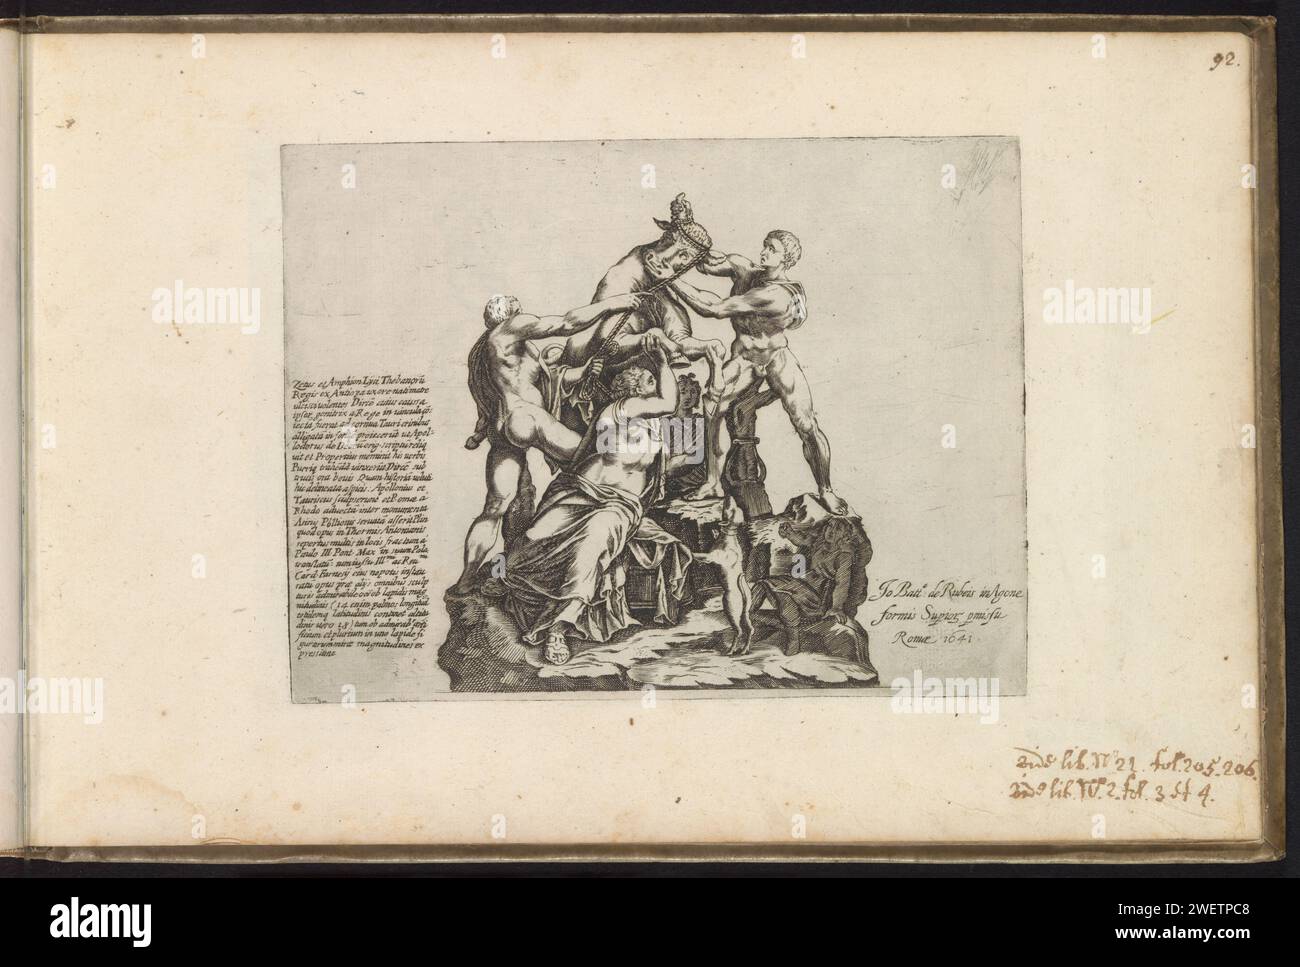 Dirce is bound to a bull, Anonymous, 1641 print Antique sculpture known as the Farnese bull. The Amphion and Stehus brothers tie the braided hair of Dirce to the horns of a bull. Caption in Latin. Print is part of an album.  paper engraving piece of sculpture, reproduction of a piece of sculpture. Amphion and Zethus avenge their mother by tying Dirce to the horns of a bull Stock Photo